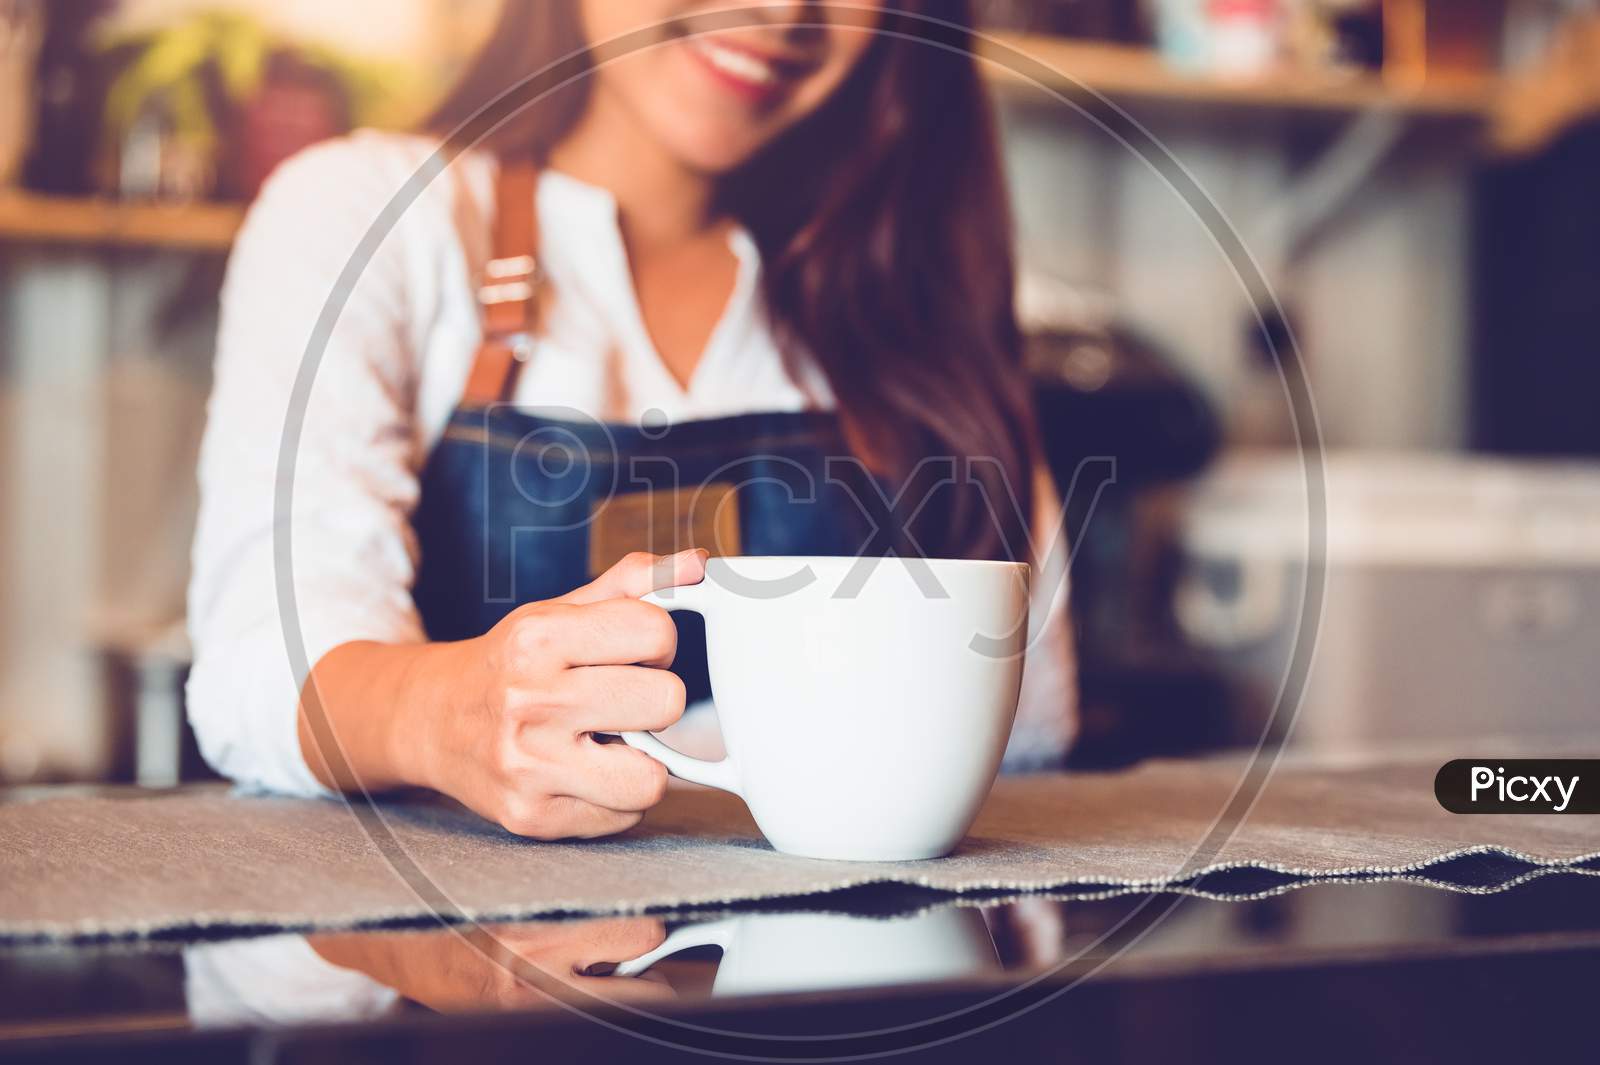 Closeup Of White Coffee Cup With Beautiful Asian Woman Barista Background For Serving To Customer. Job And Occupation. Food And Drink Beverage. Coffee Shop And Cafe. Business And Restaurant Ownership